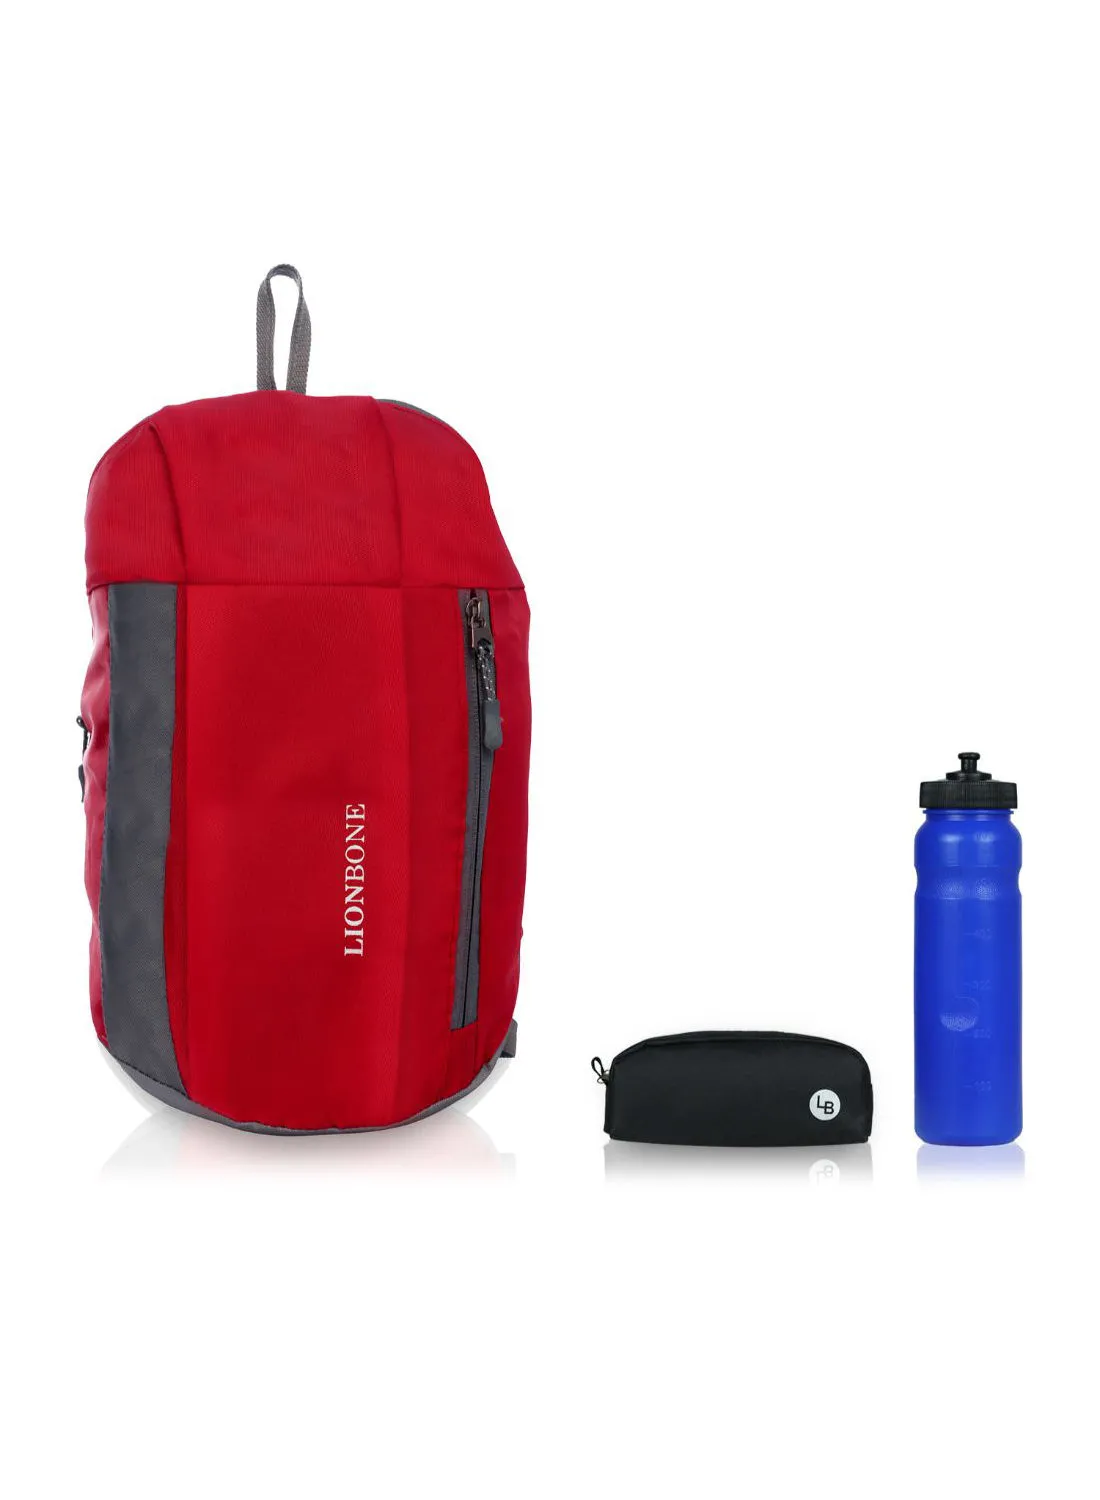 LIONBONE Combo of Backpack, Pouch and Sipper Red/Grey